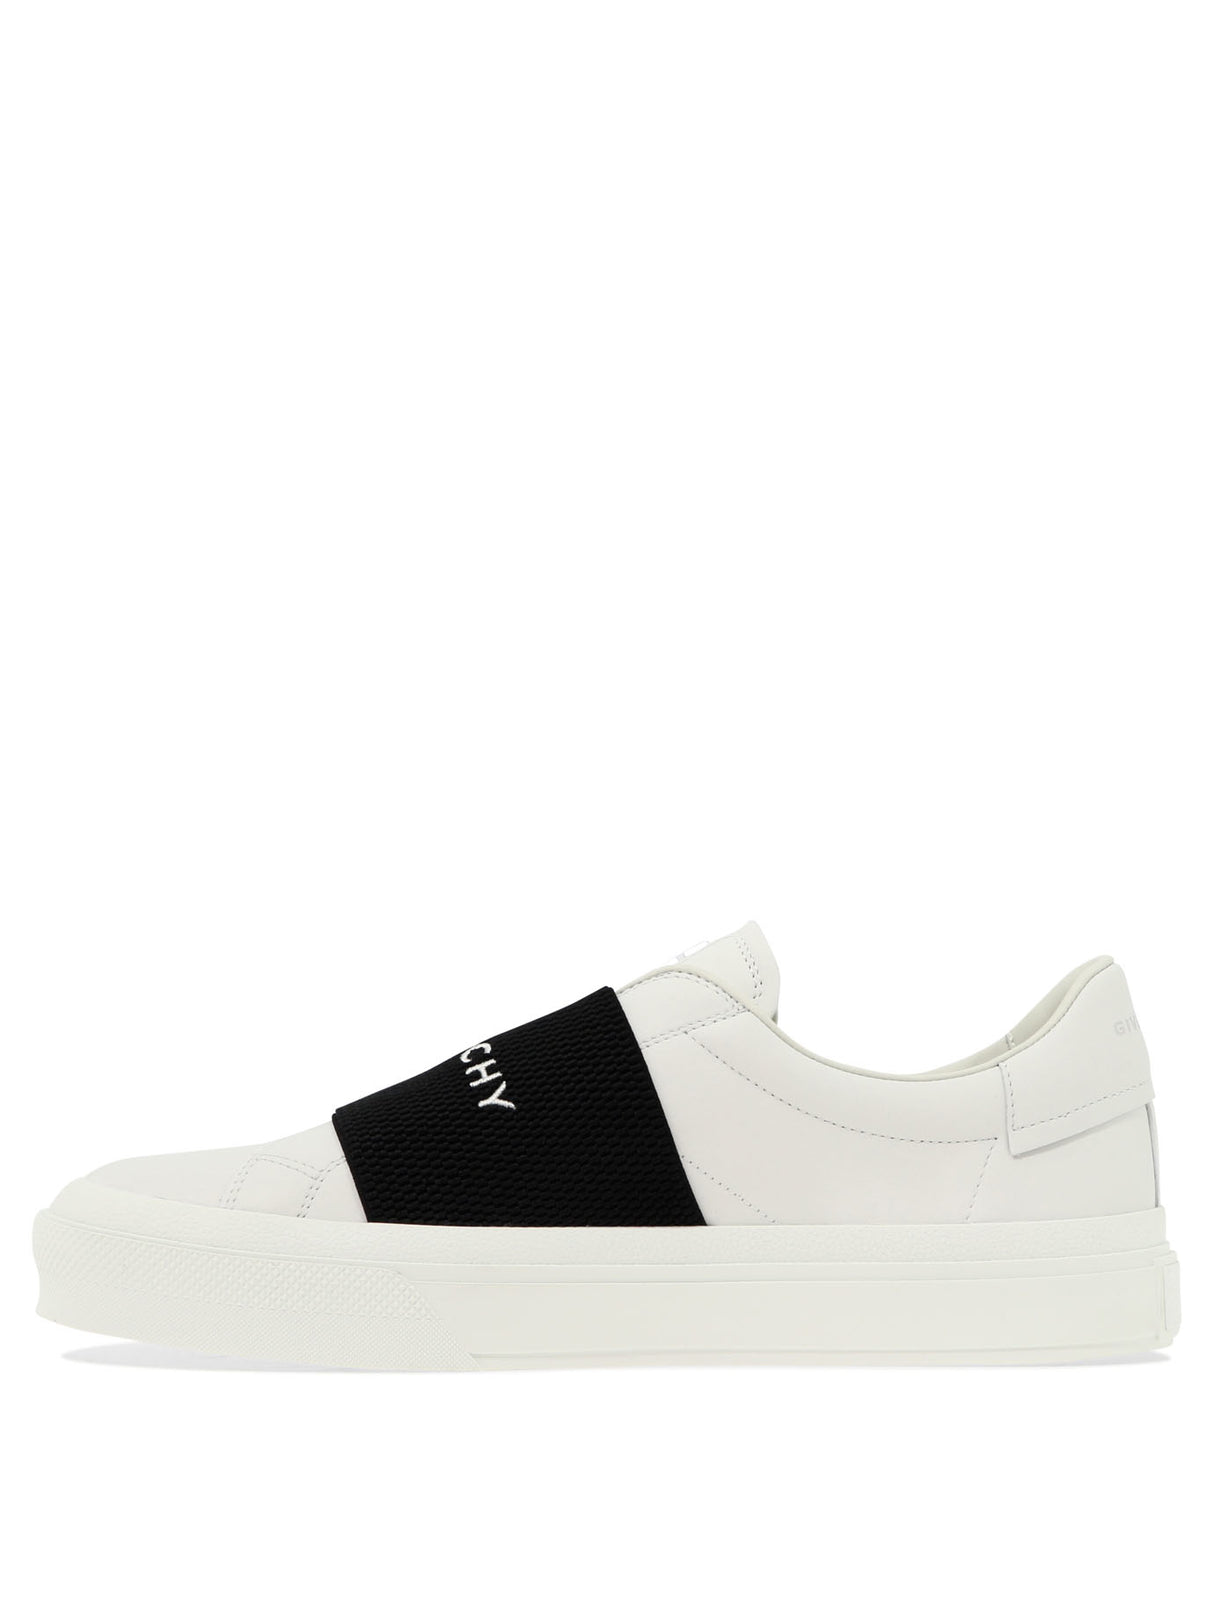 GIVENCHY "NEW CITY" Sneaker